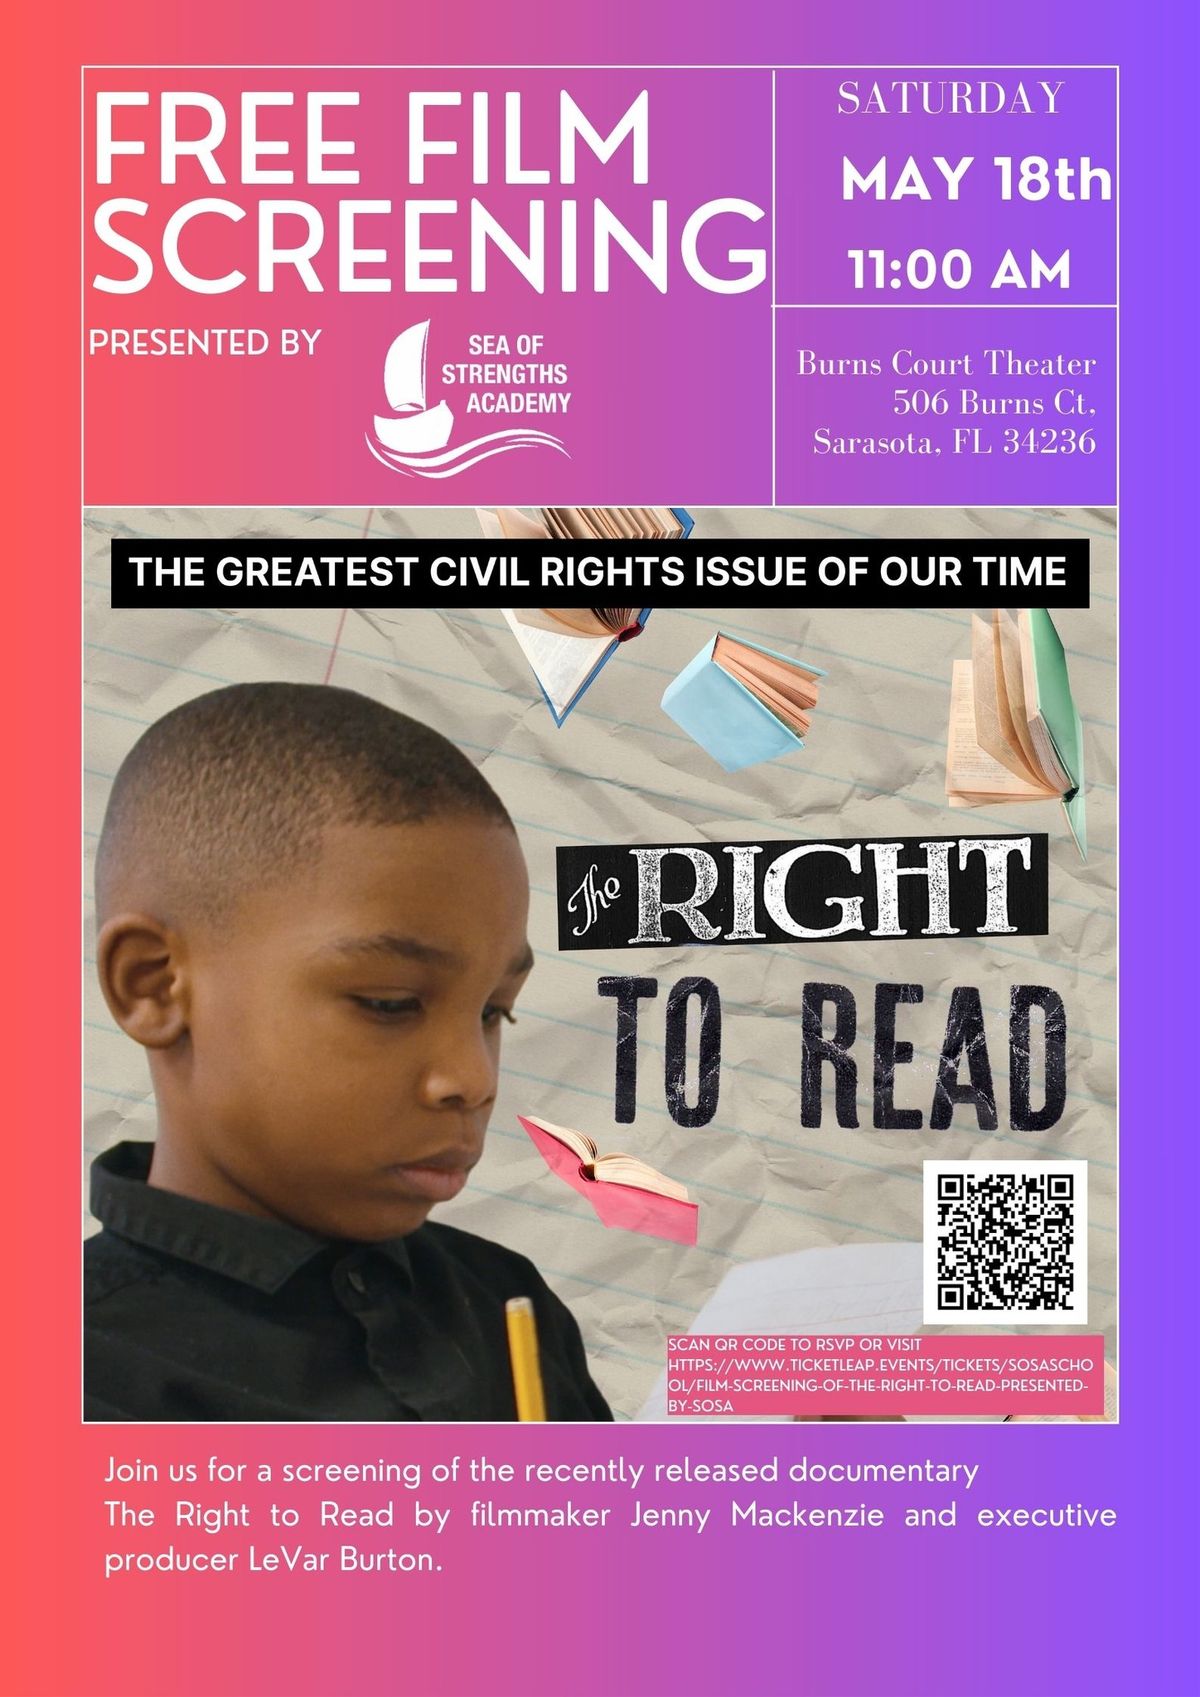 "The Right to Read" Free Film Screening Presented by Sea of Strengths Academy